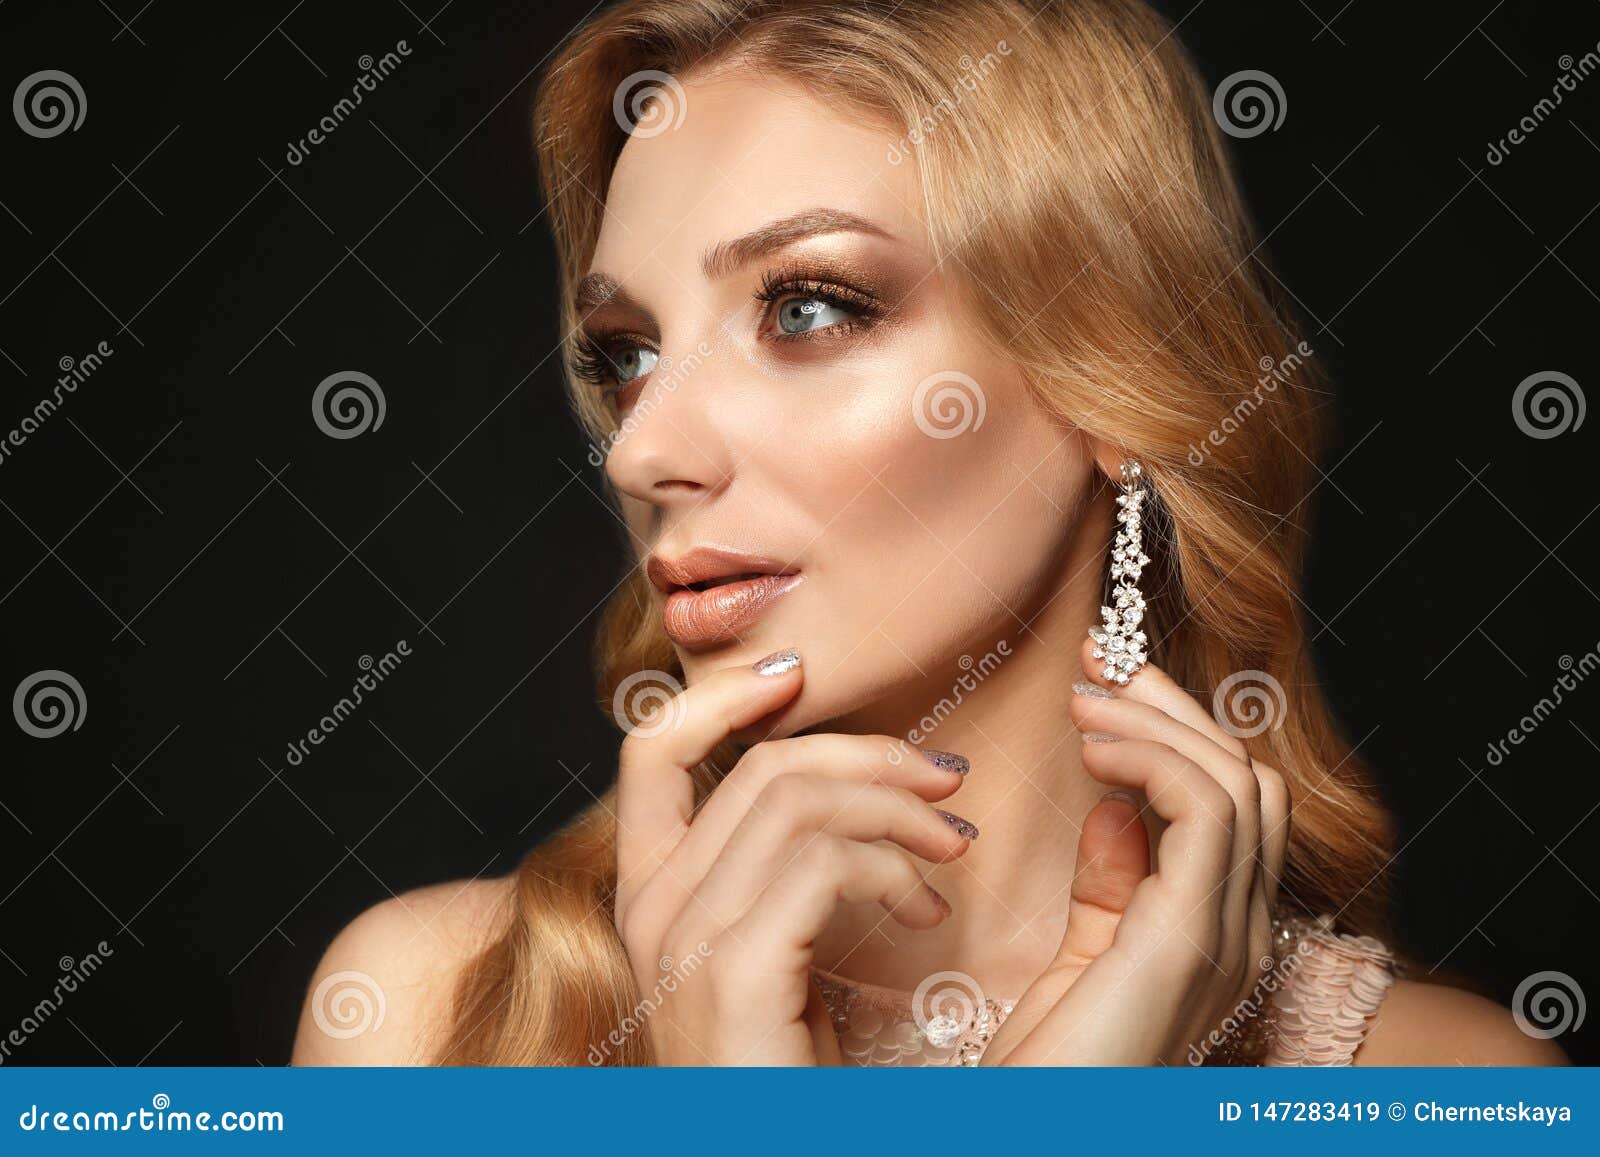 Beautiful Young Woman with Elegant Jewelry Stock Image - Image of gold ...